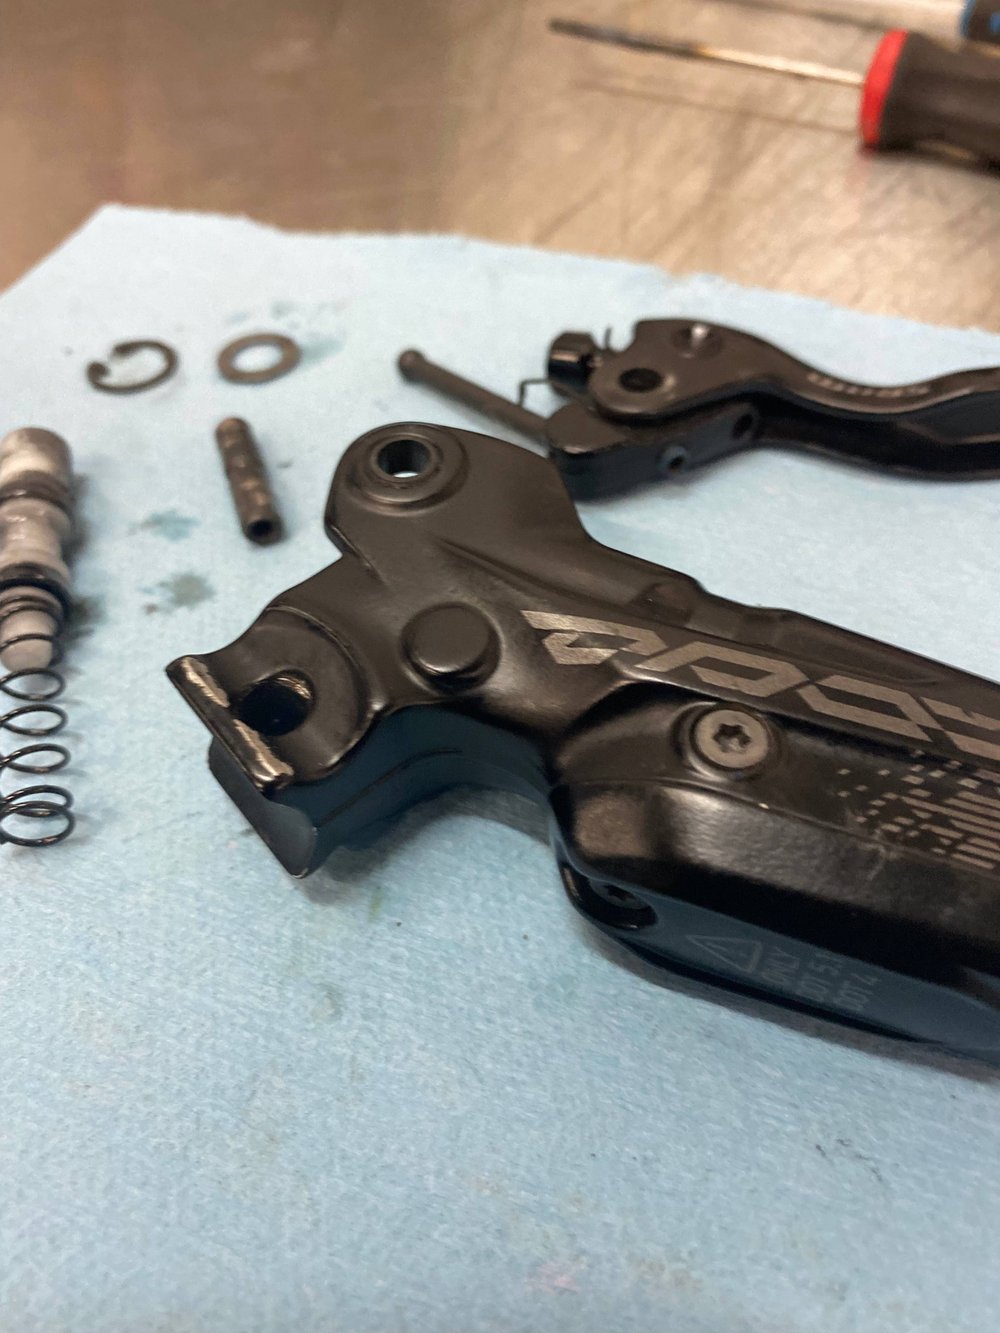  The repair is fairly involved but gives us a chance to clean out the internals of your lever, including the bladder. We also  clean and lube the lever spring and reach adjust controls. 